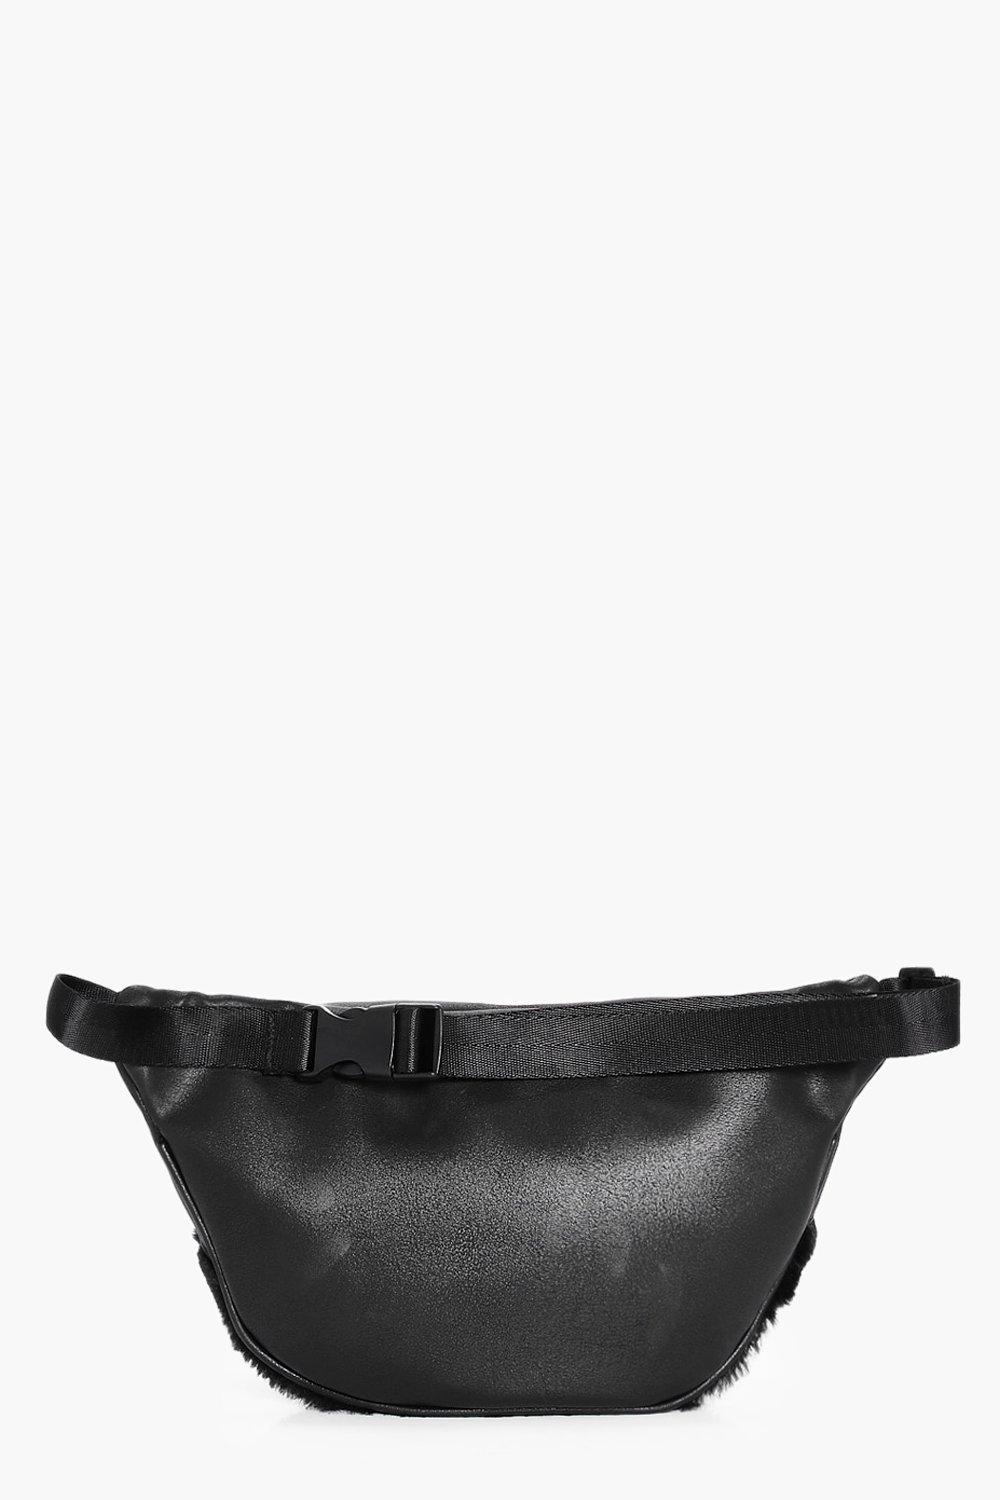 boohoo Faux Leather Belted Fanny Pack - Black - One Size